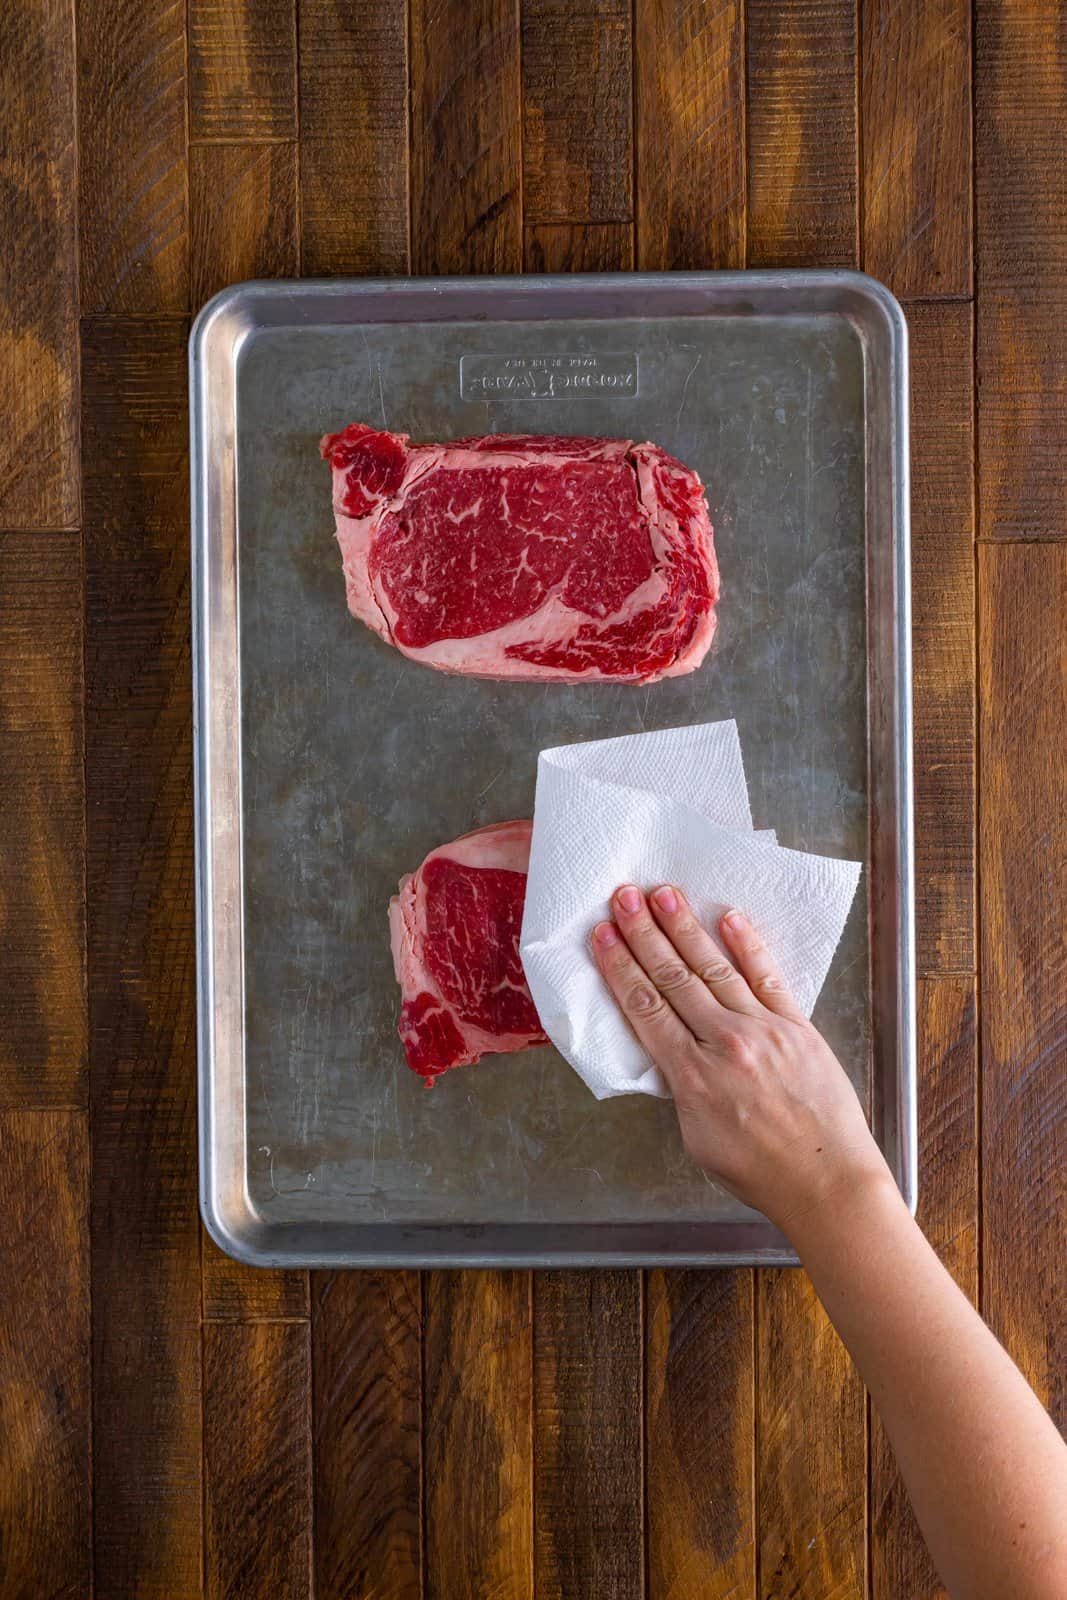 A sheet pan with two raw steaks and a hand patting them dry with a paper towel.